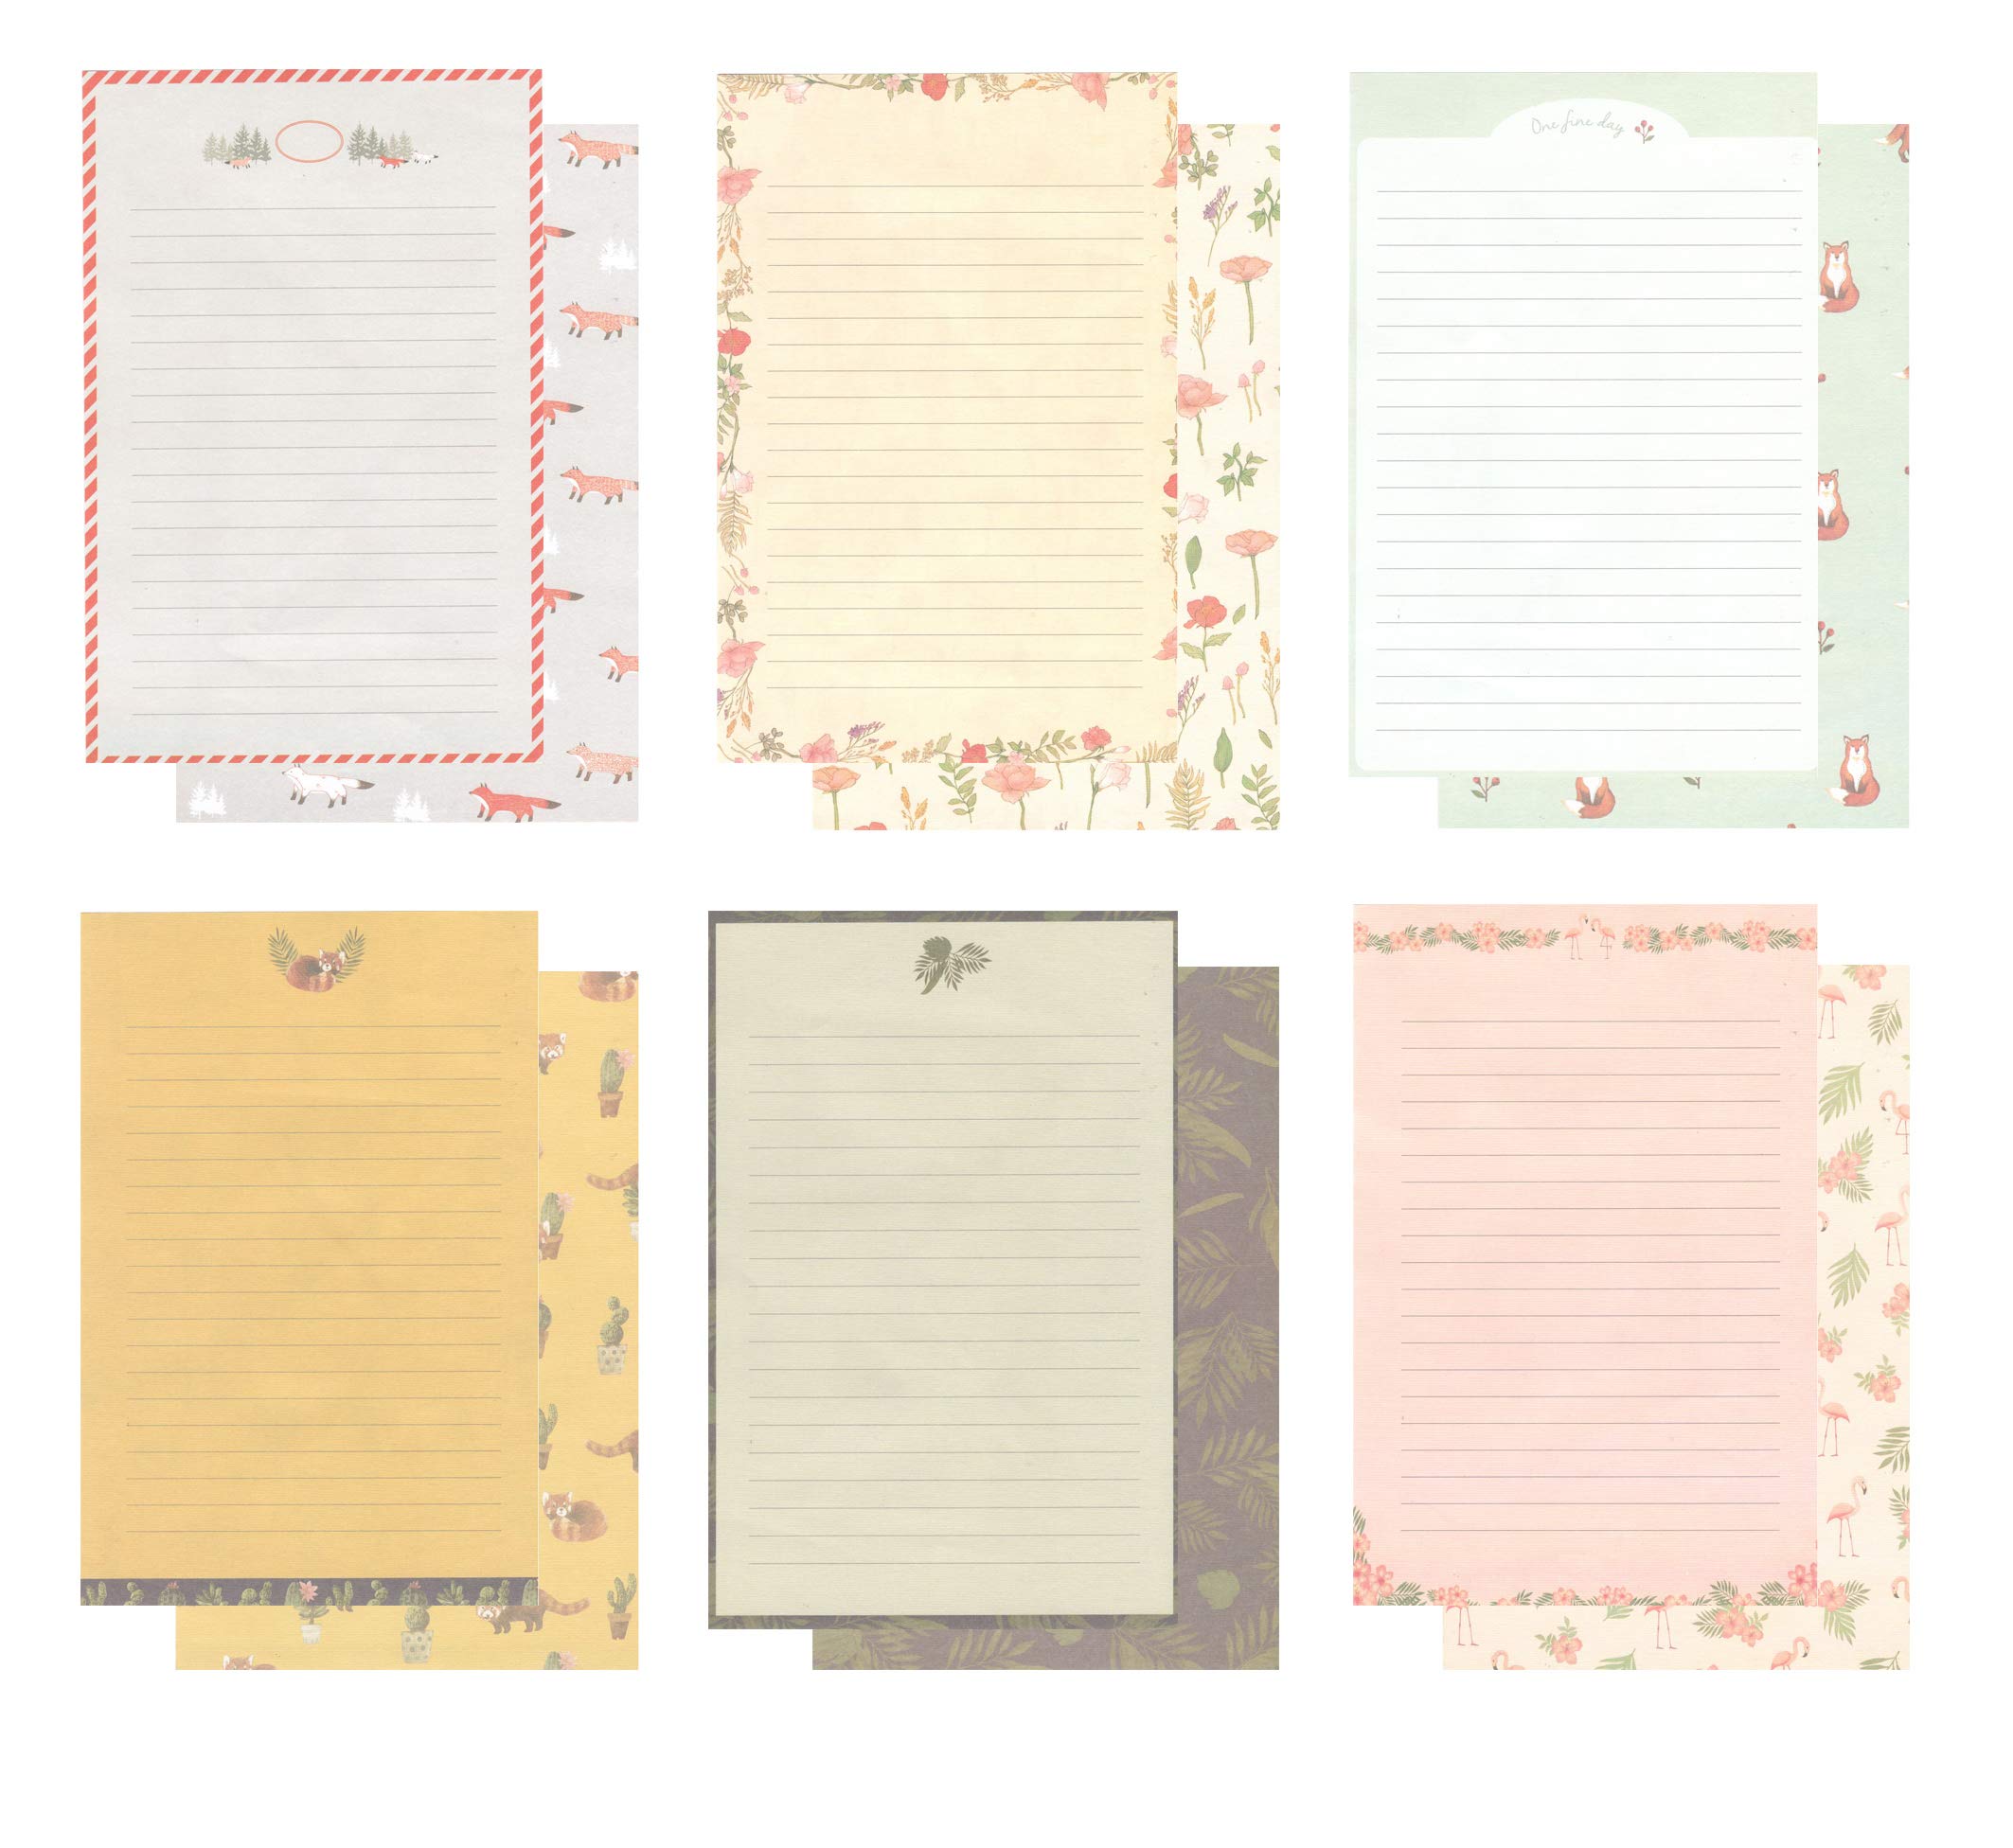 IMagicoo 48 Cute Lovely Writing Stationery Paper Letter Set with 24 Envelope / Envelope Seal Sticker (10)